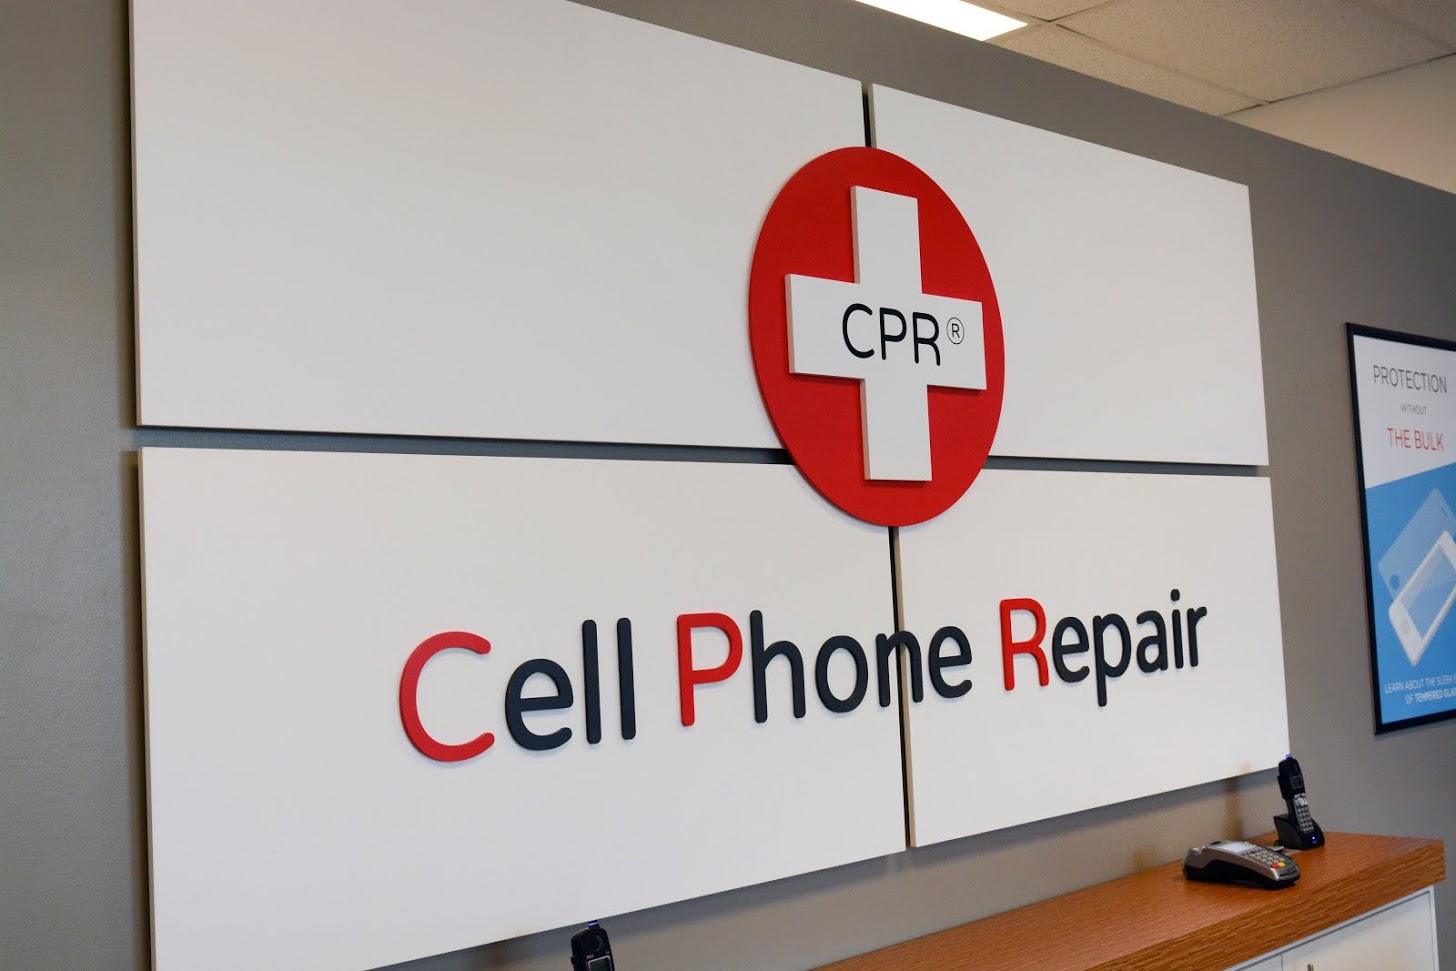 CPR Cell Phone Repair, Thursday, May 2, 2019, Press release picture